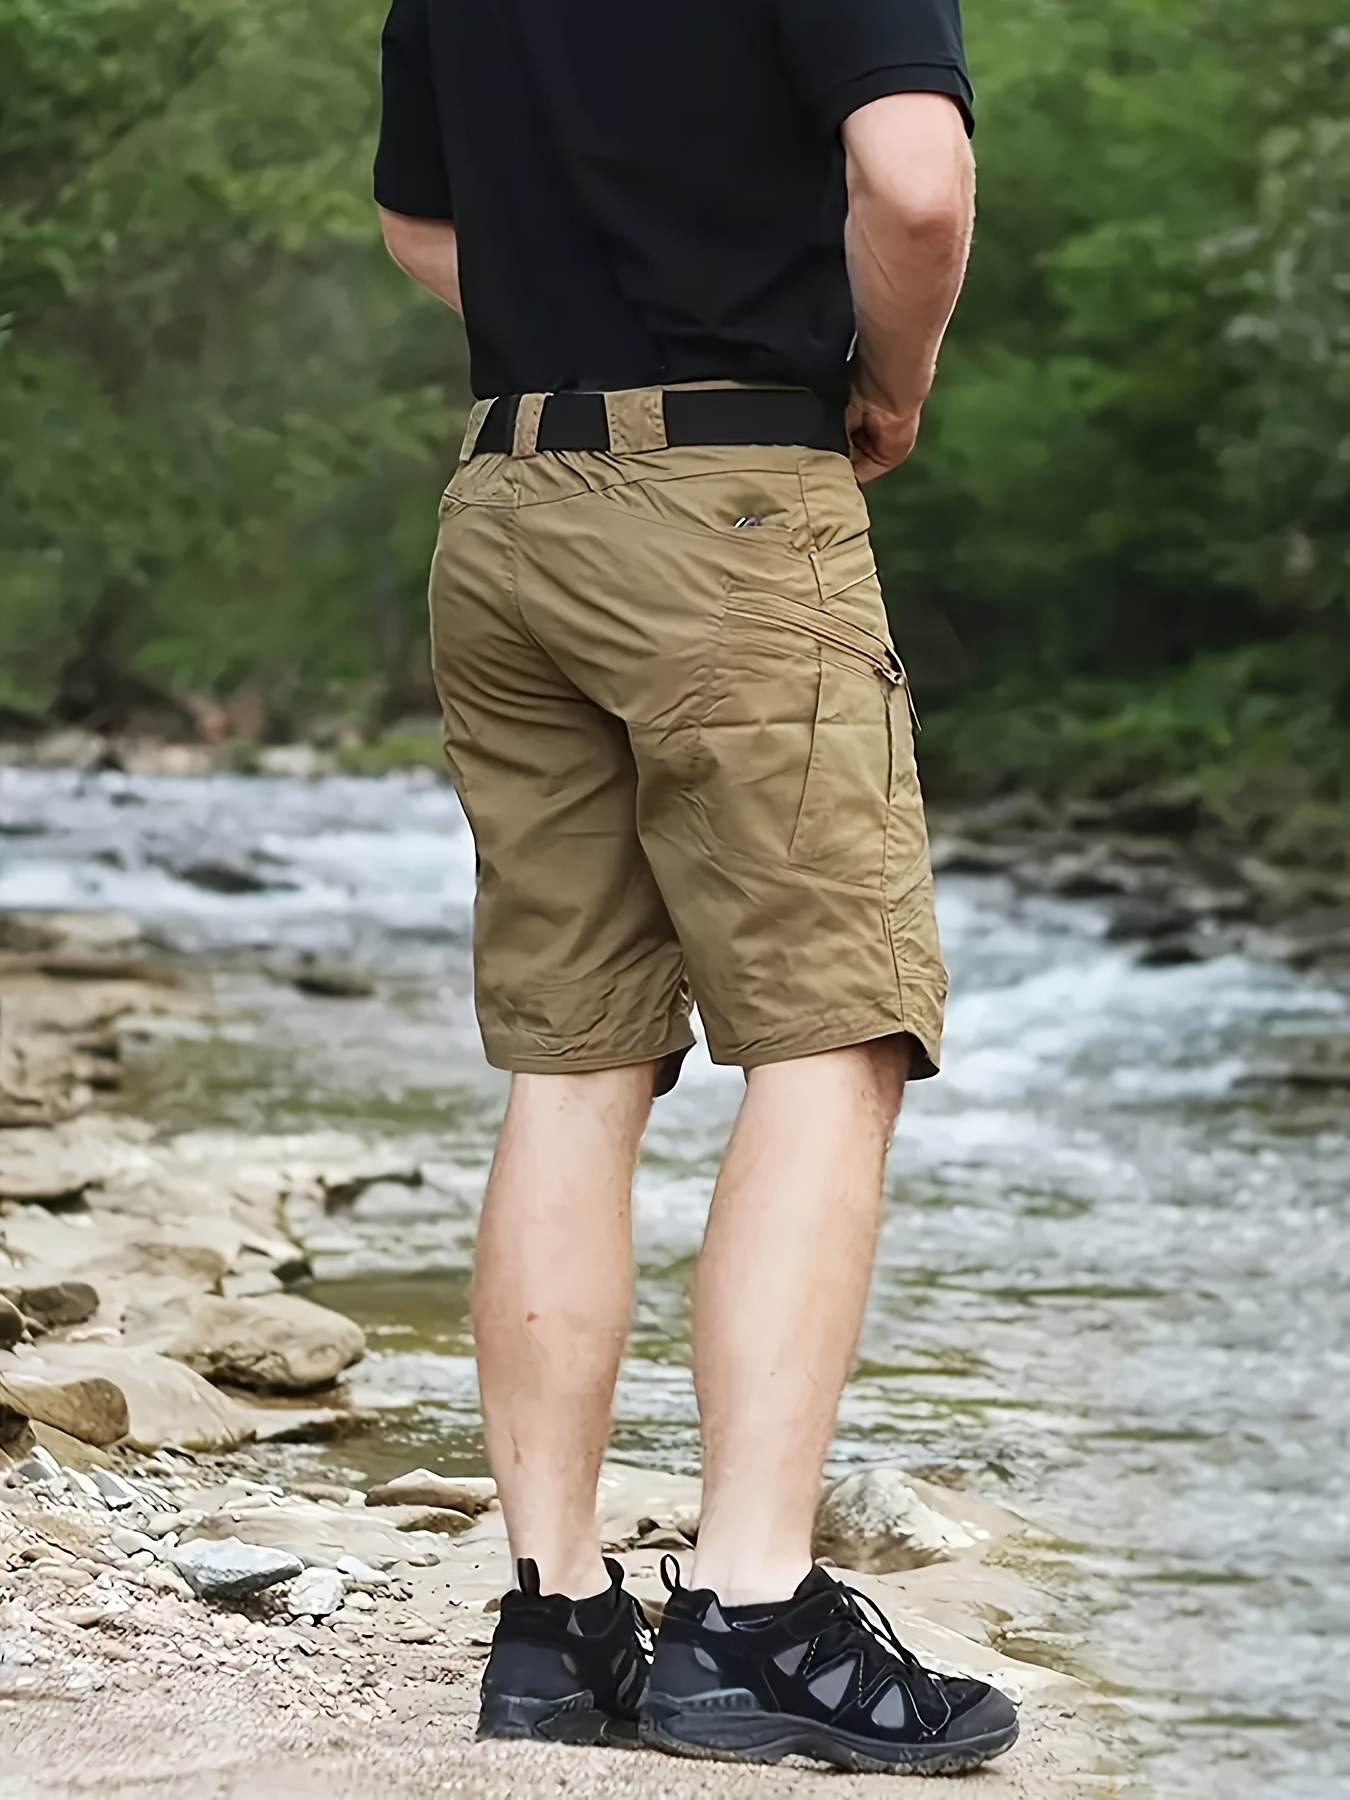 Men's Waterproof Tactical Shorts Outdoor Cargo Shorts, Lightweight Quick  Dry Breathable Hiking Fishing Cargo Shorts